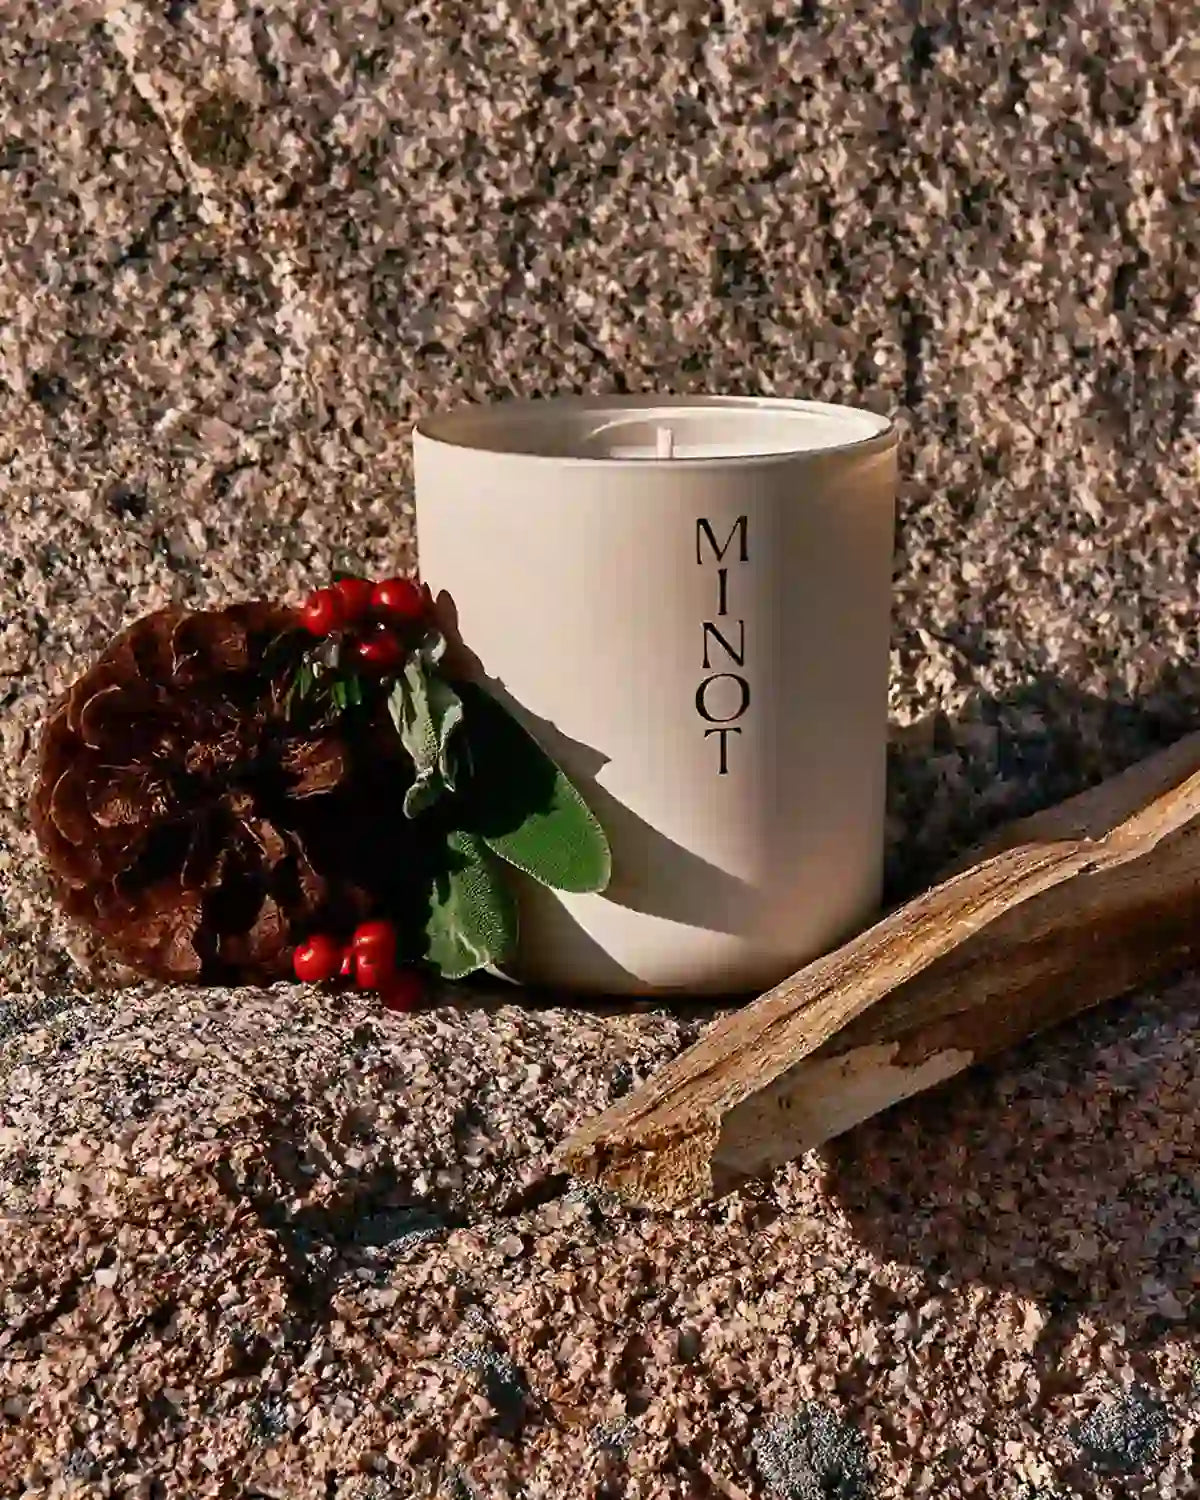 The Summit candle smells like evergreens atop a mountain with its earthy, uplifting scent blend